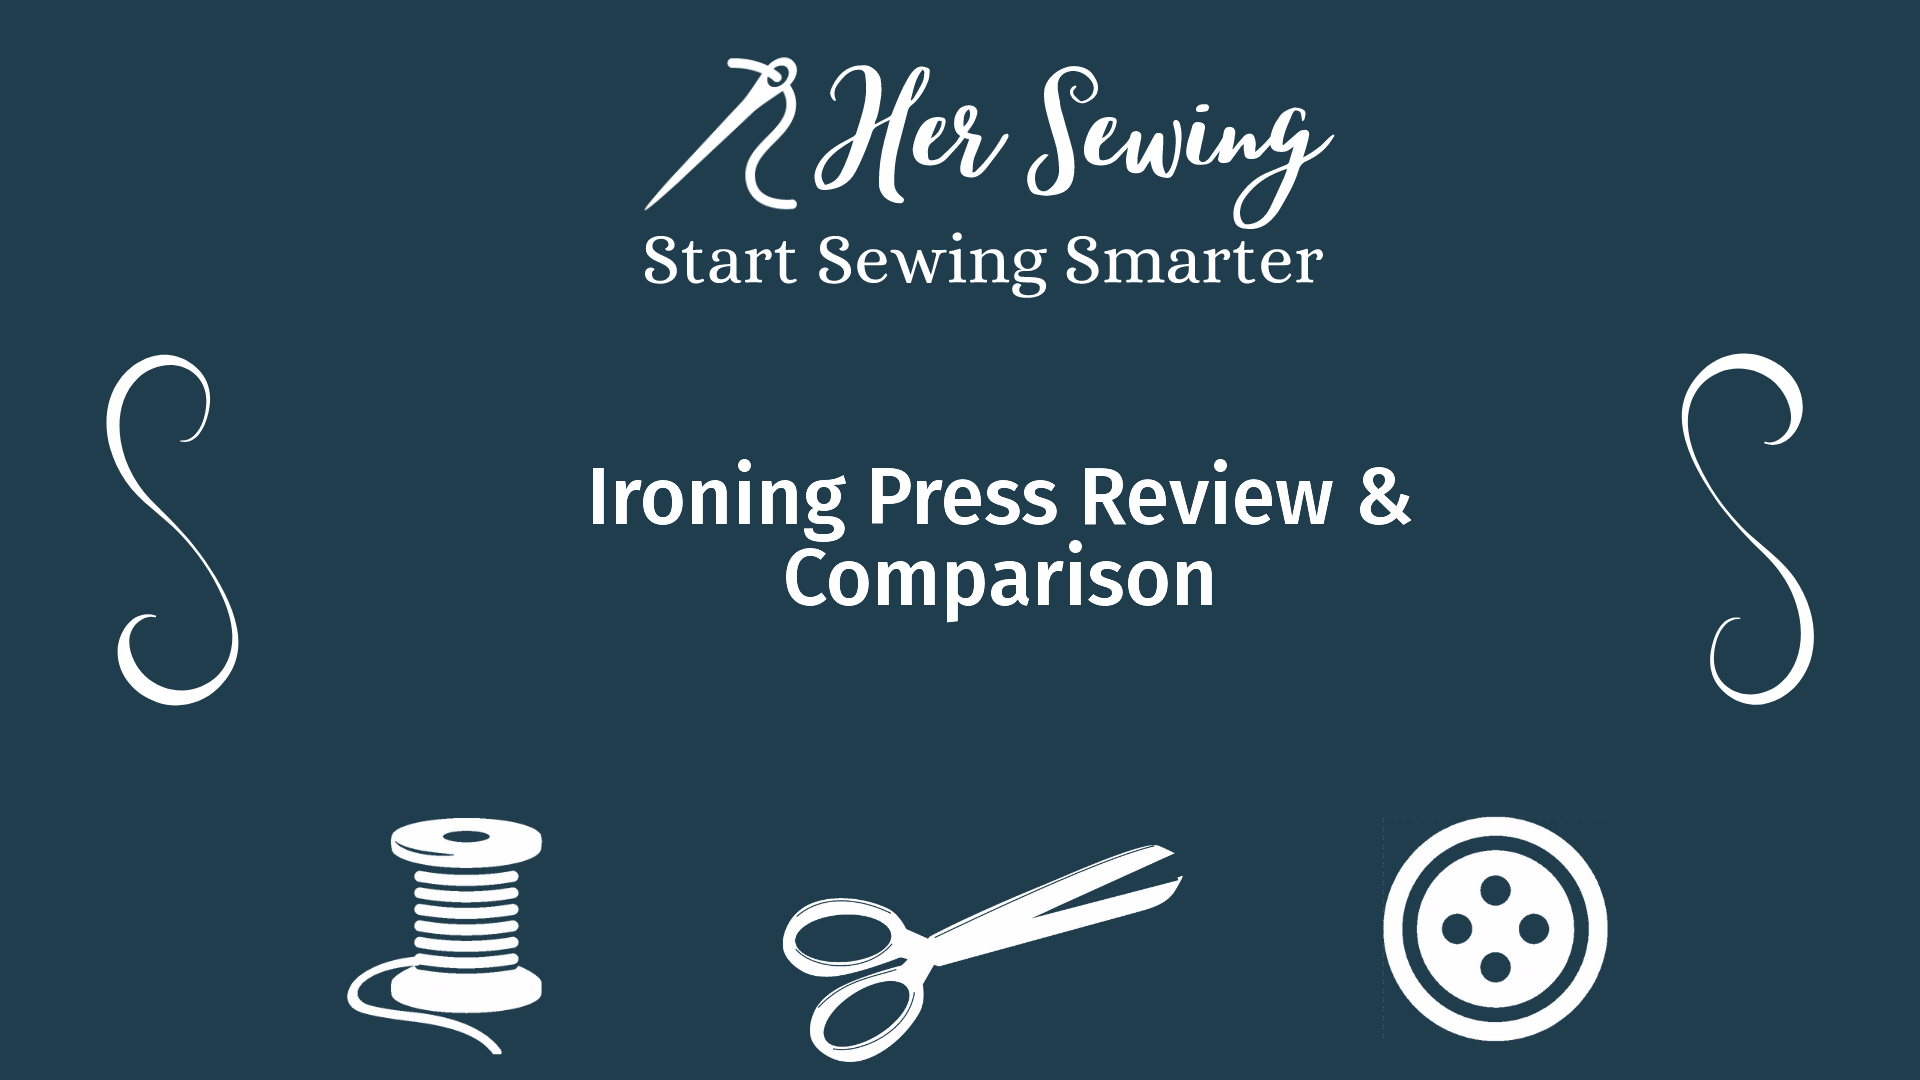 Ironing Press Review & Comparison